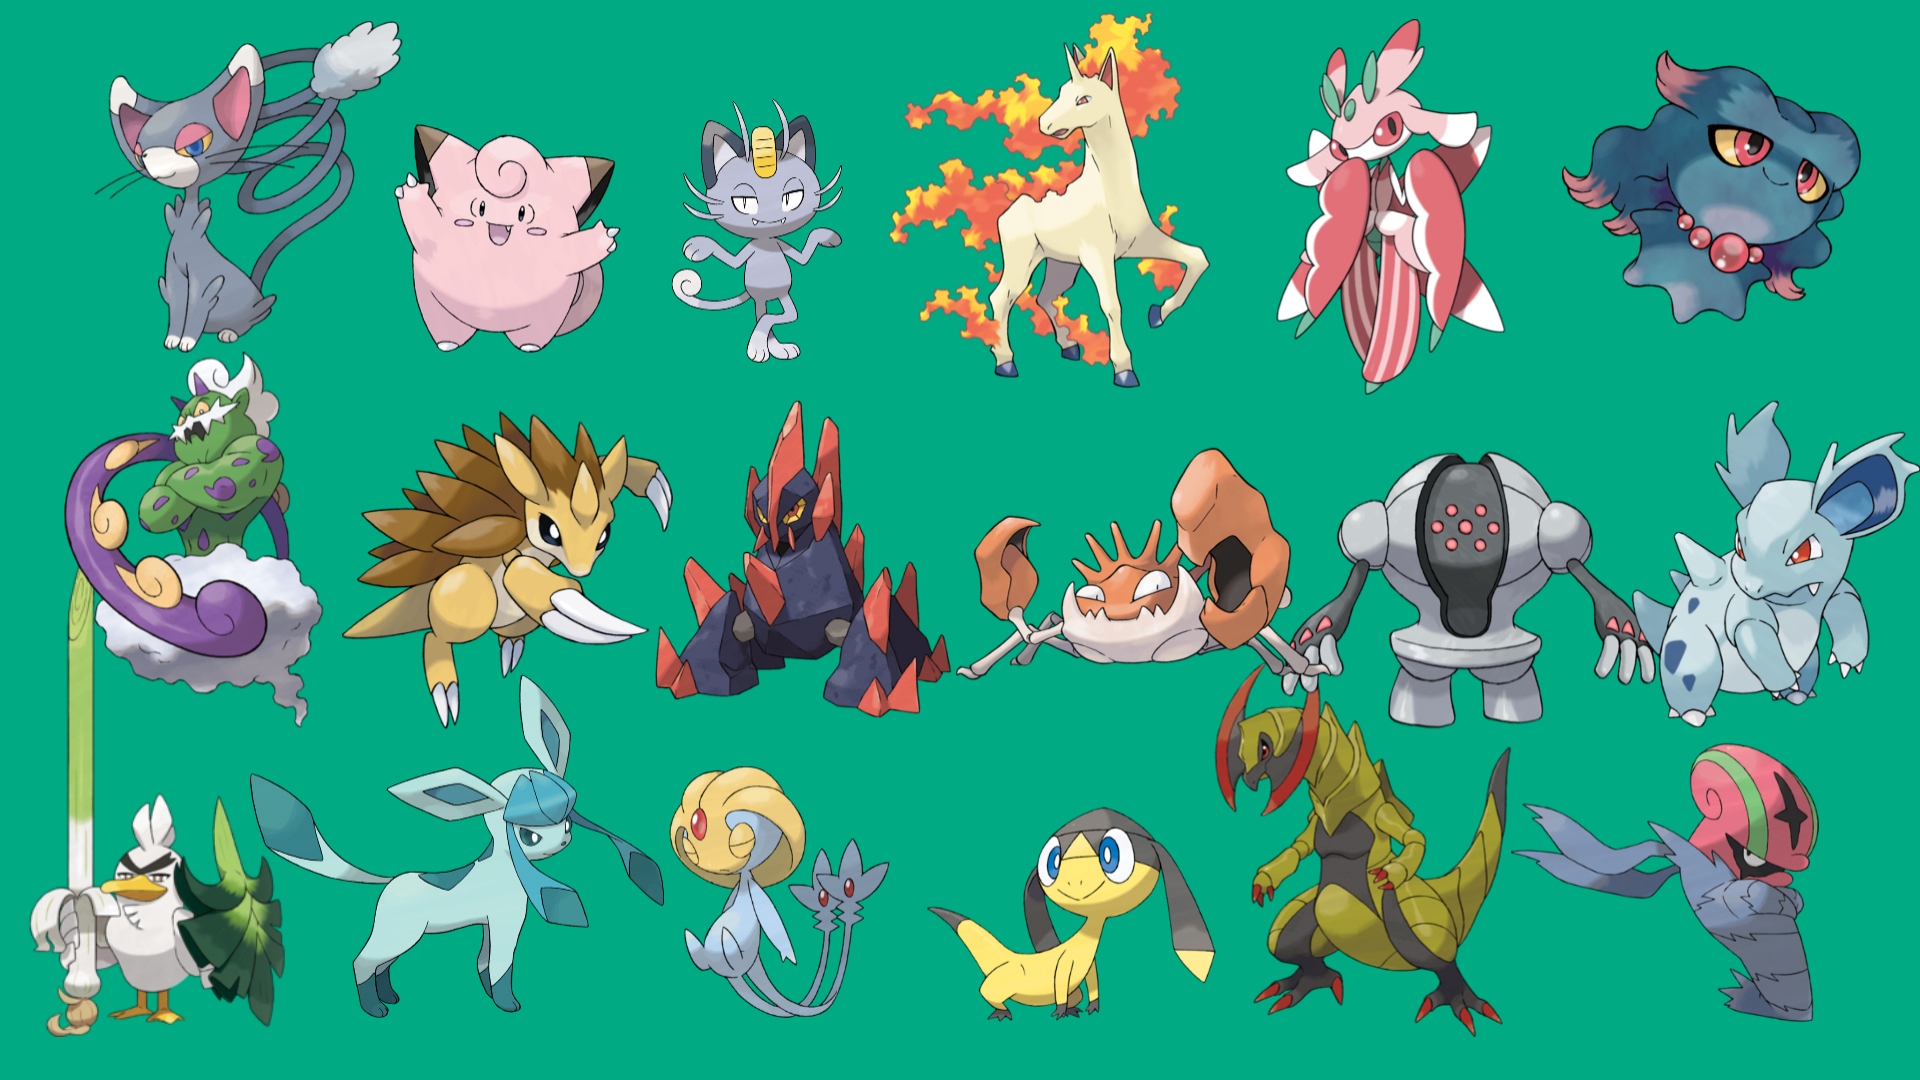 Pokémon type chart, Strengths, weaknesses and effectiveness of types